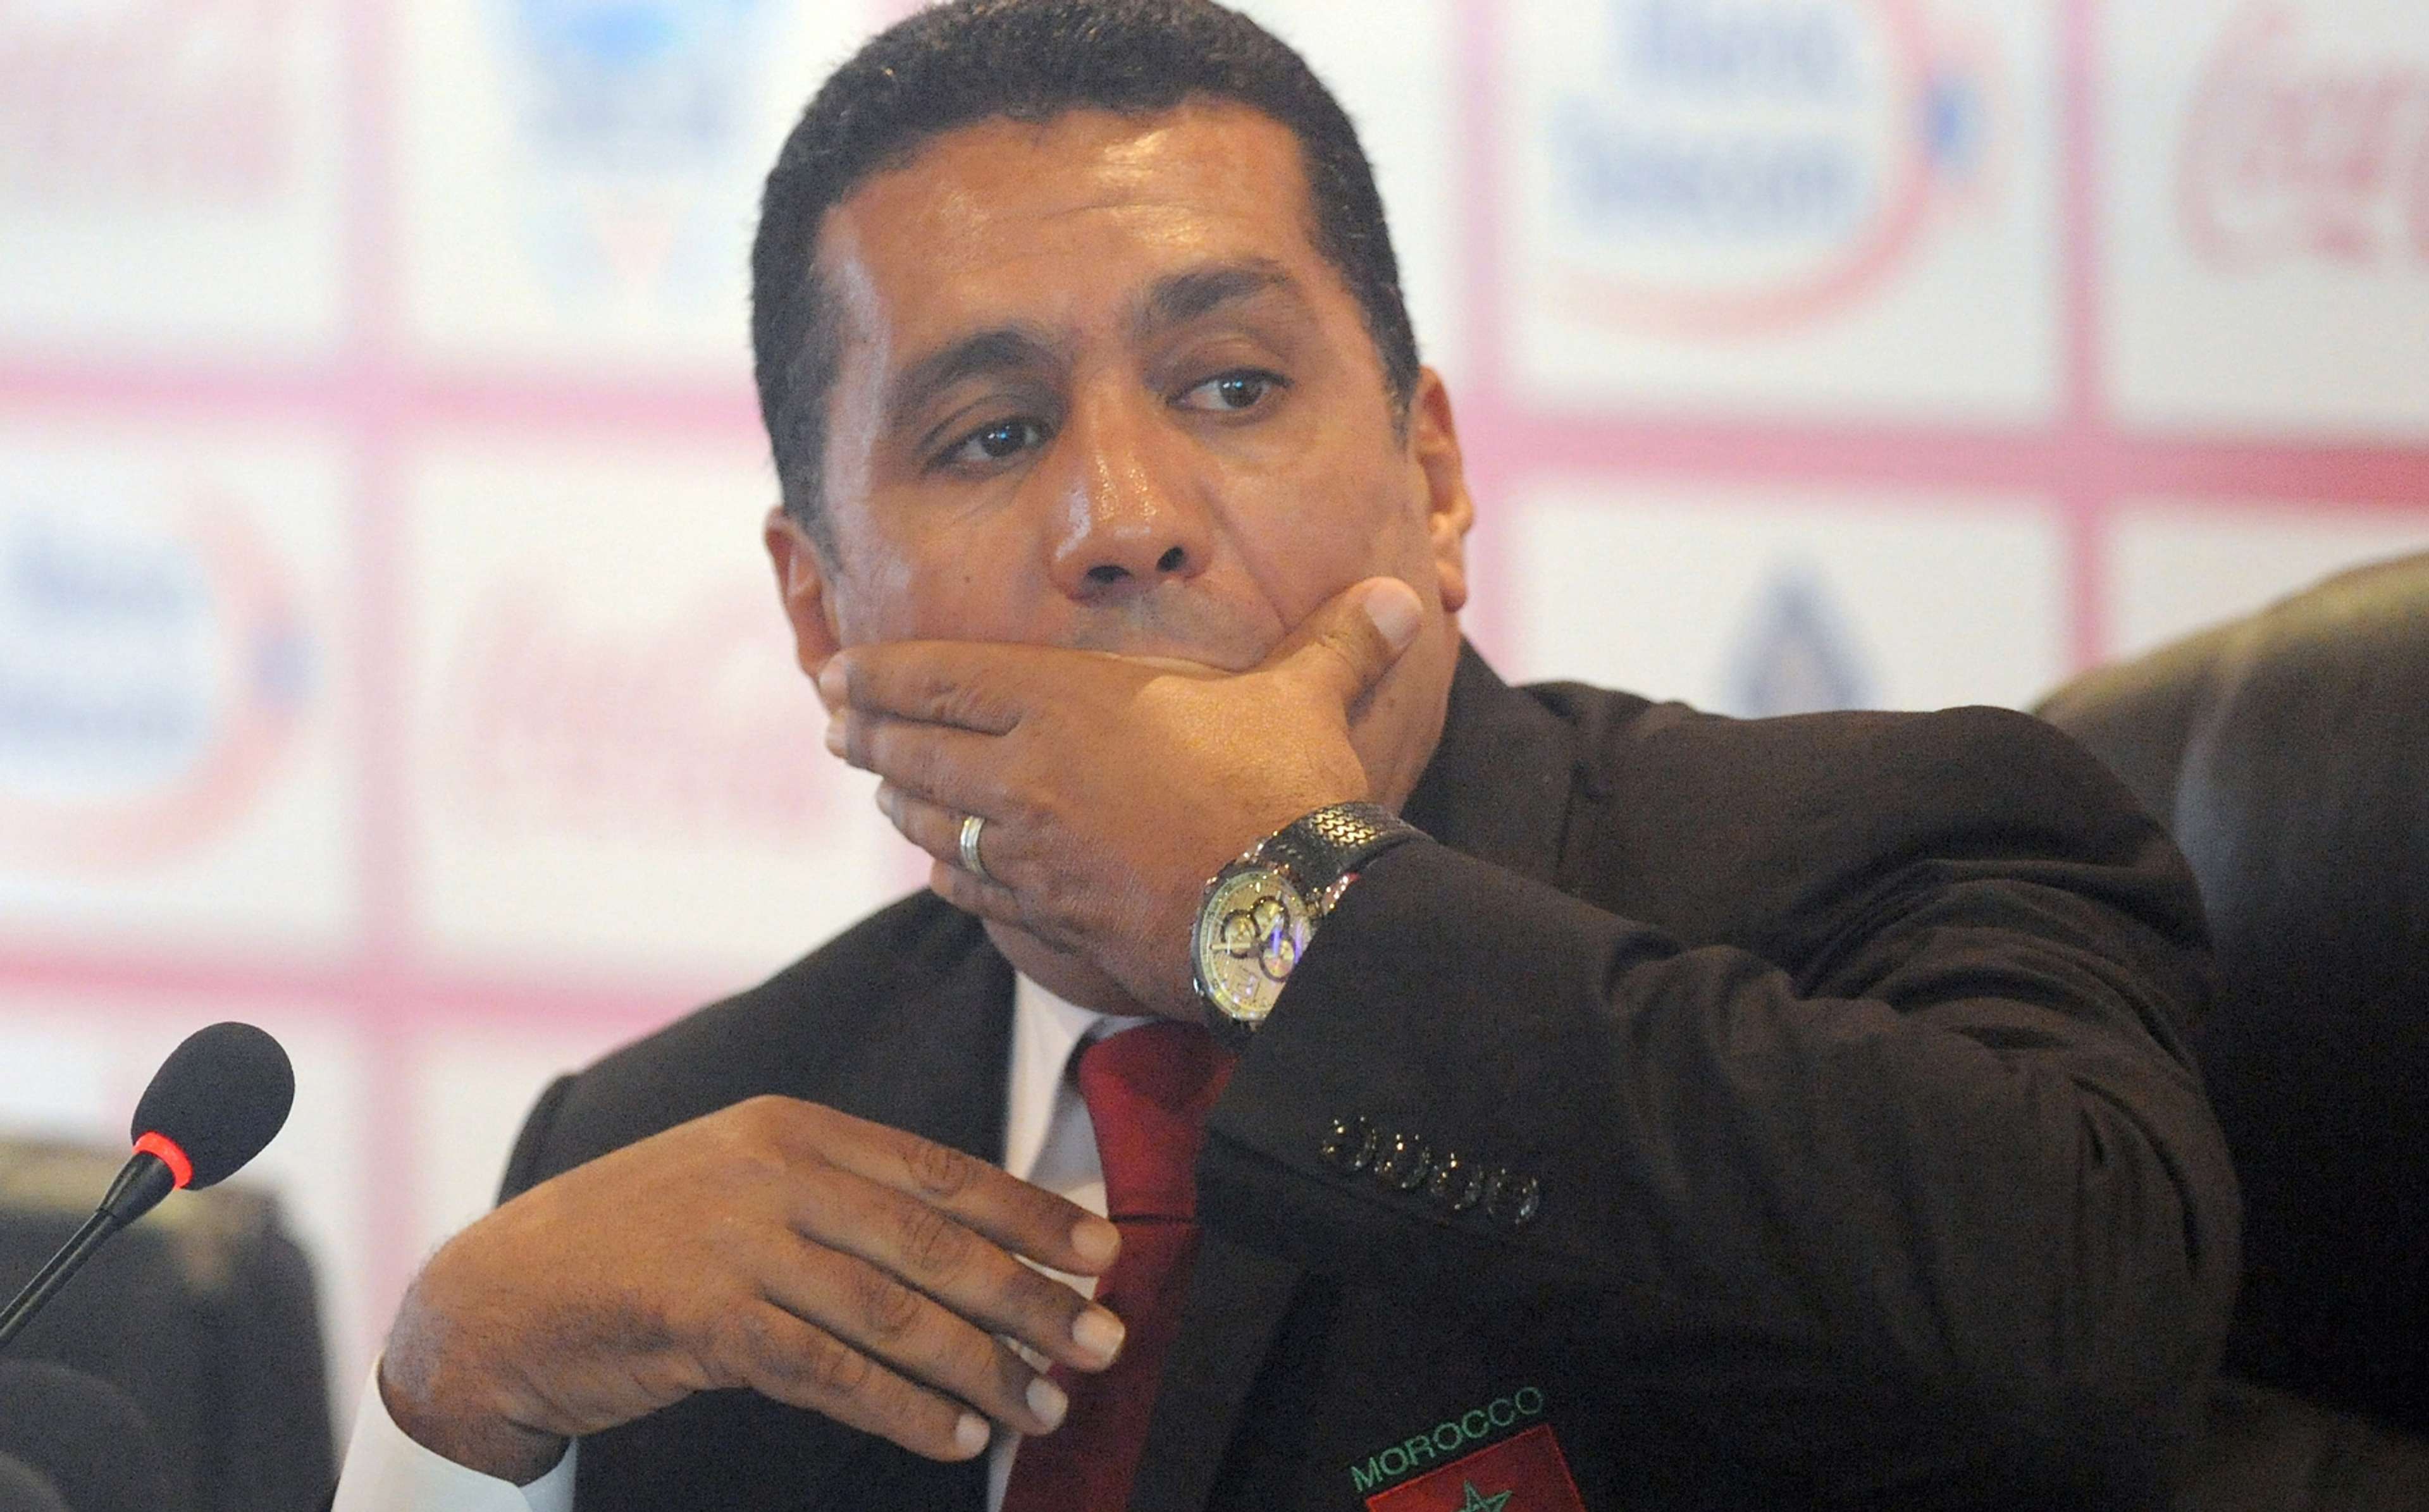 Head coach of the Moroccan national football team, Rachid Taoussi